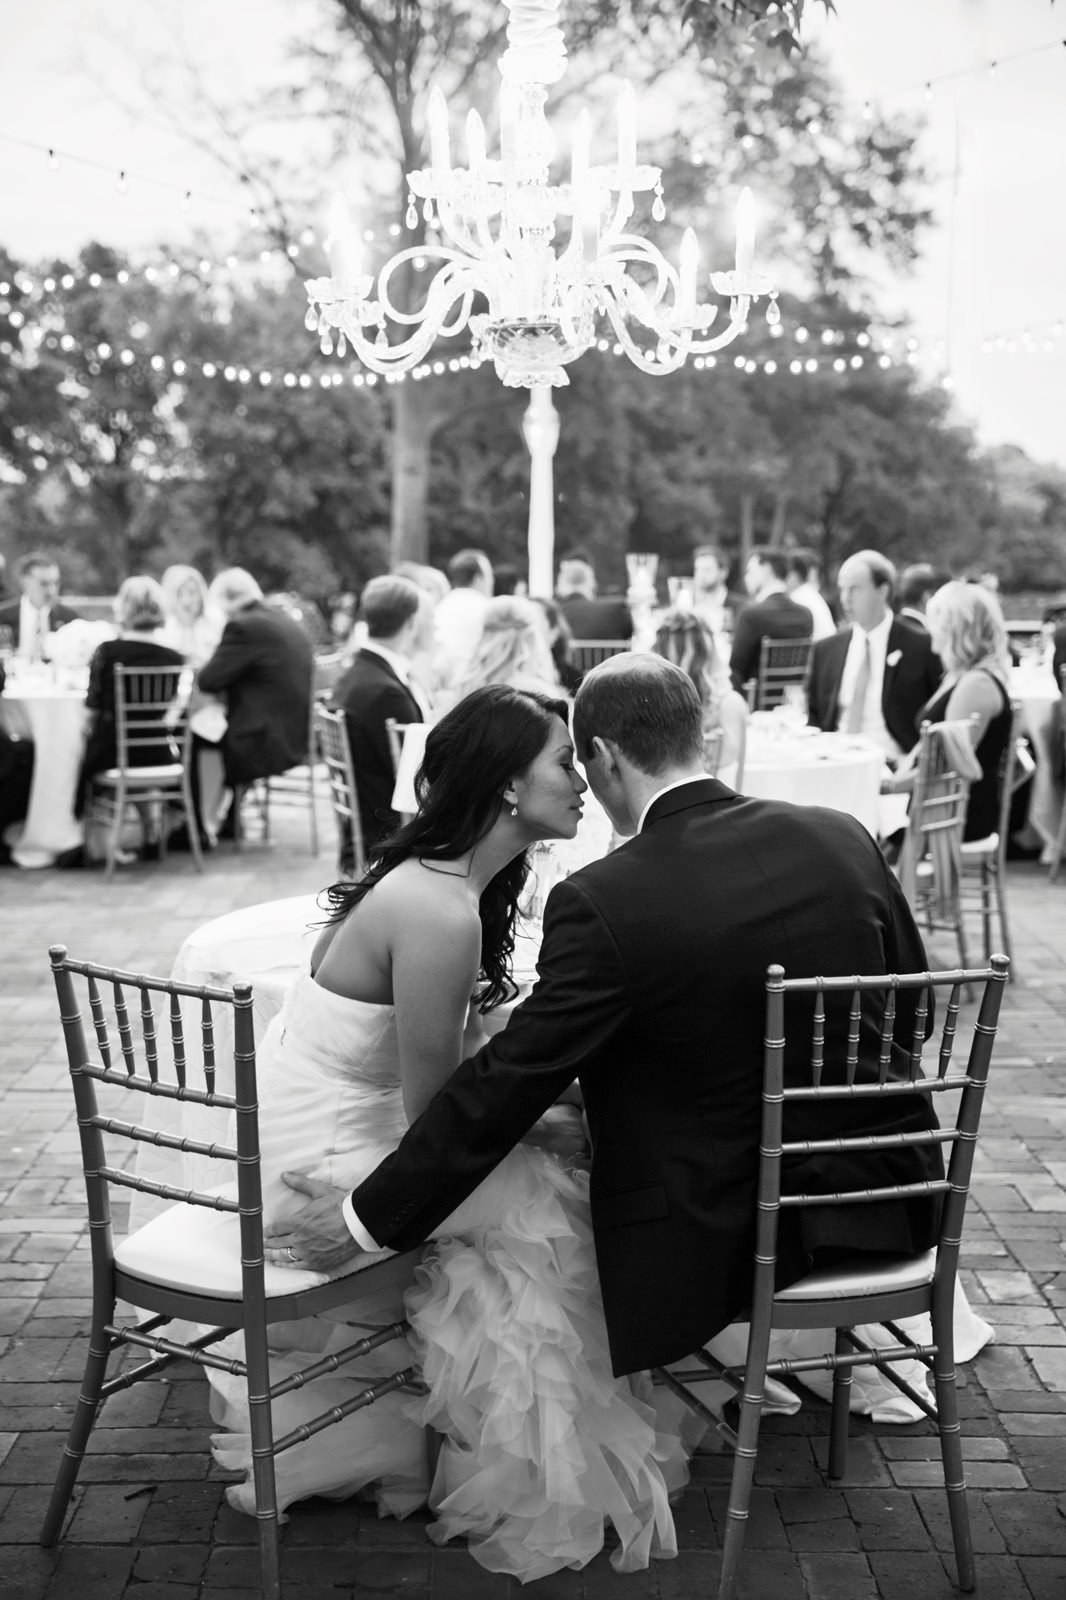 L_Photographie_wedding_wedding_ceremony_and_reception_same_venue_old_warson_country_club_wedding_photographers_st_32